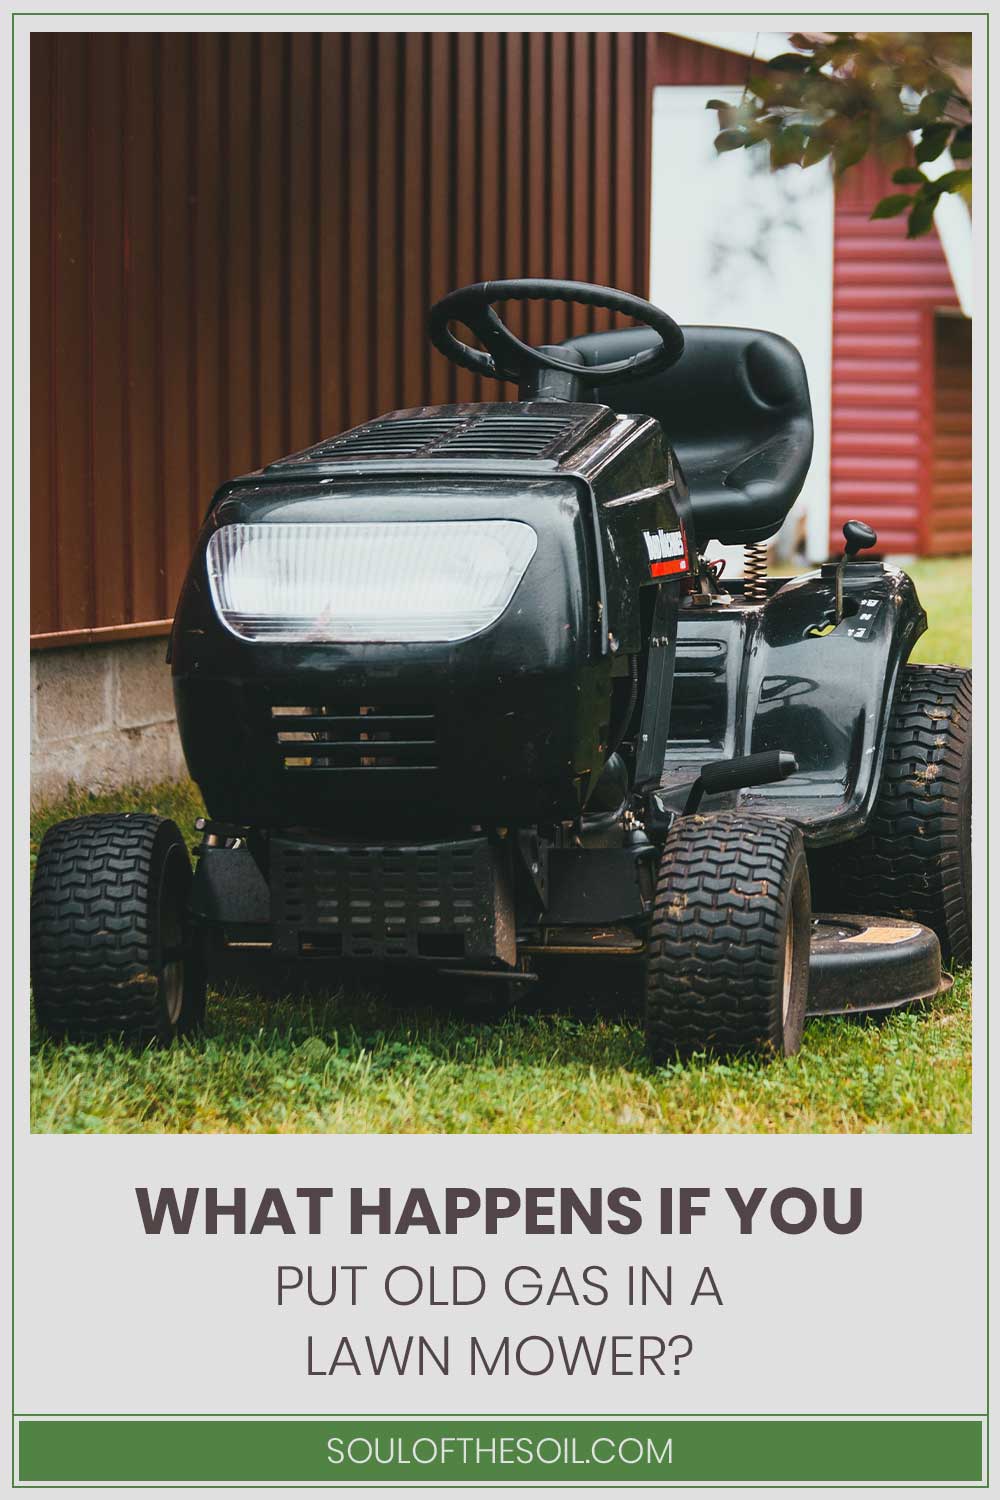 What Happens If You Put Old Gas In A Lawn Mower?